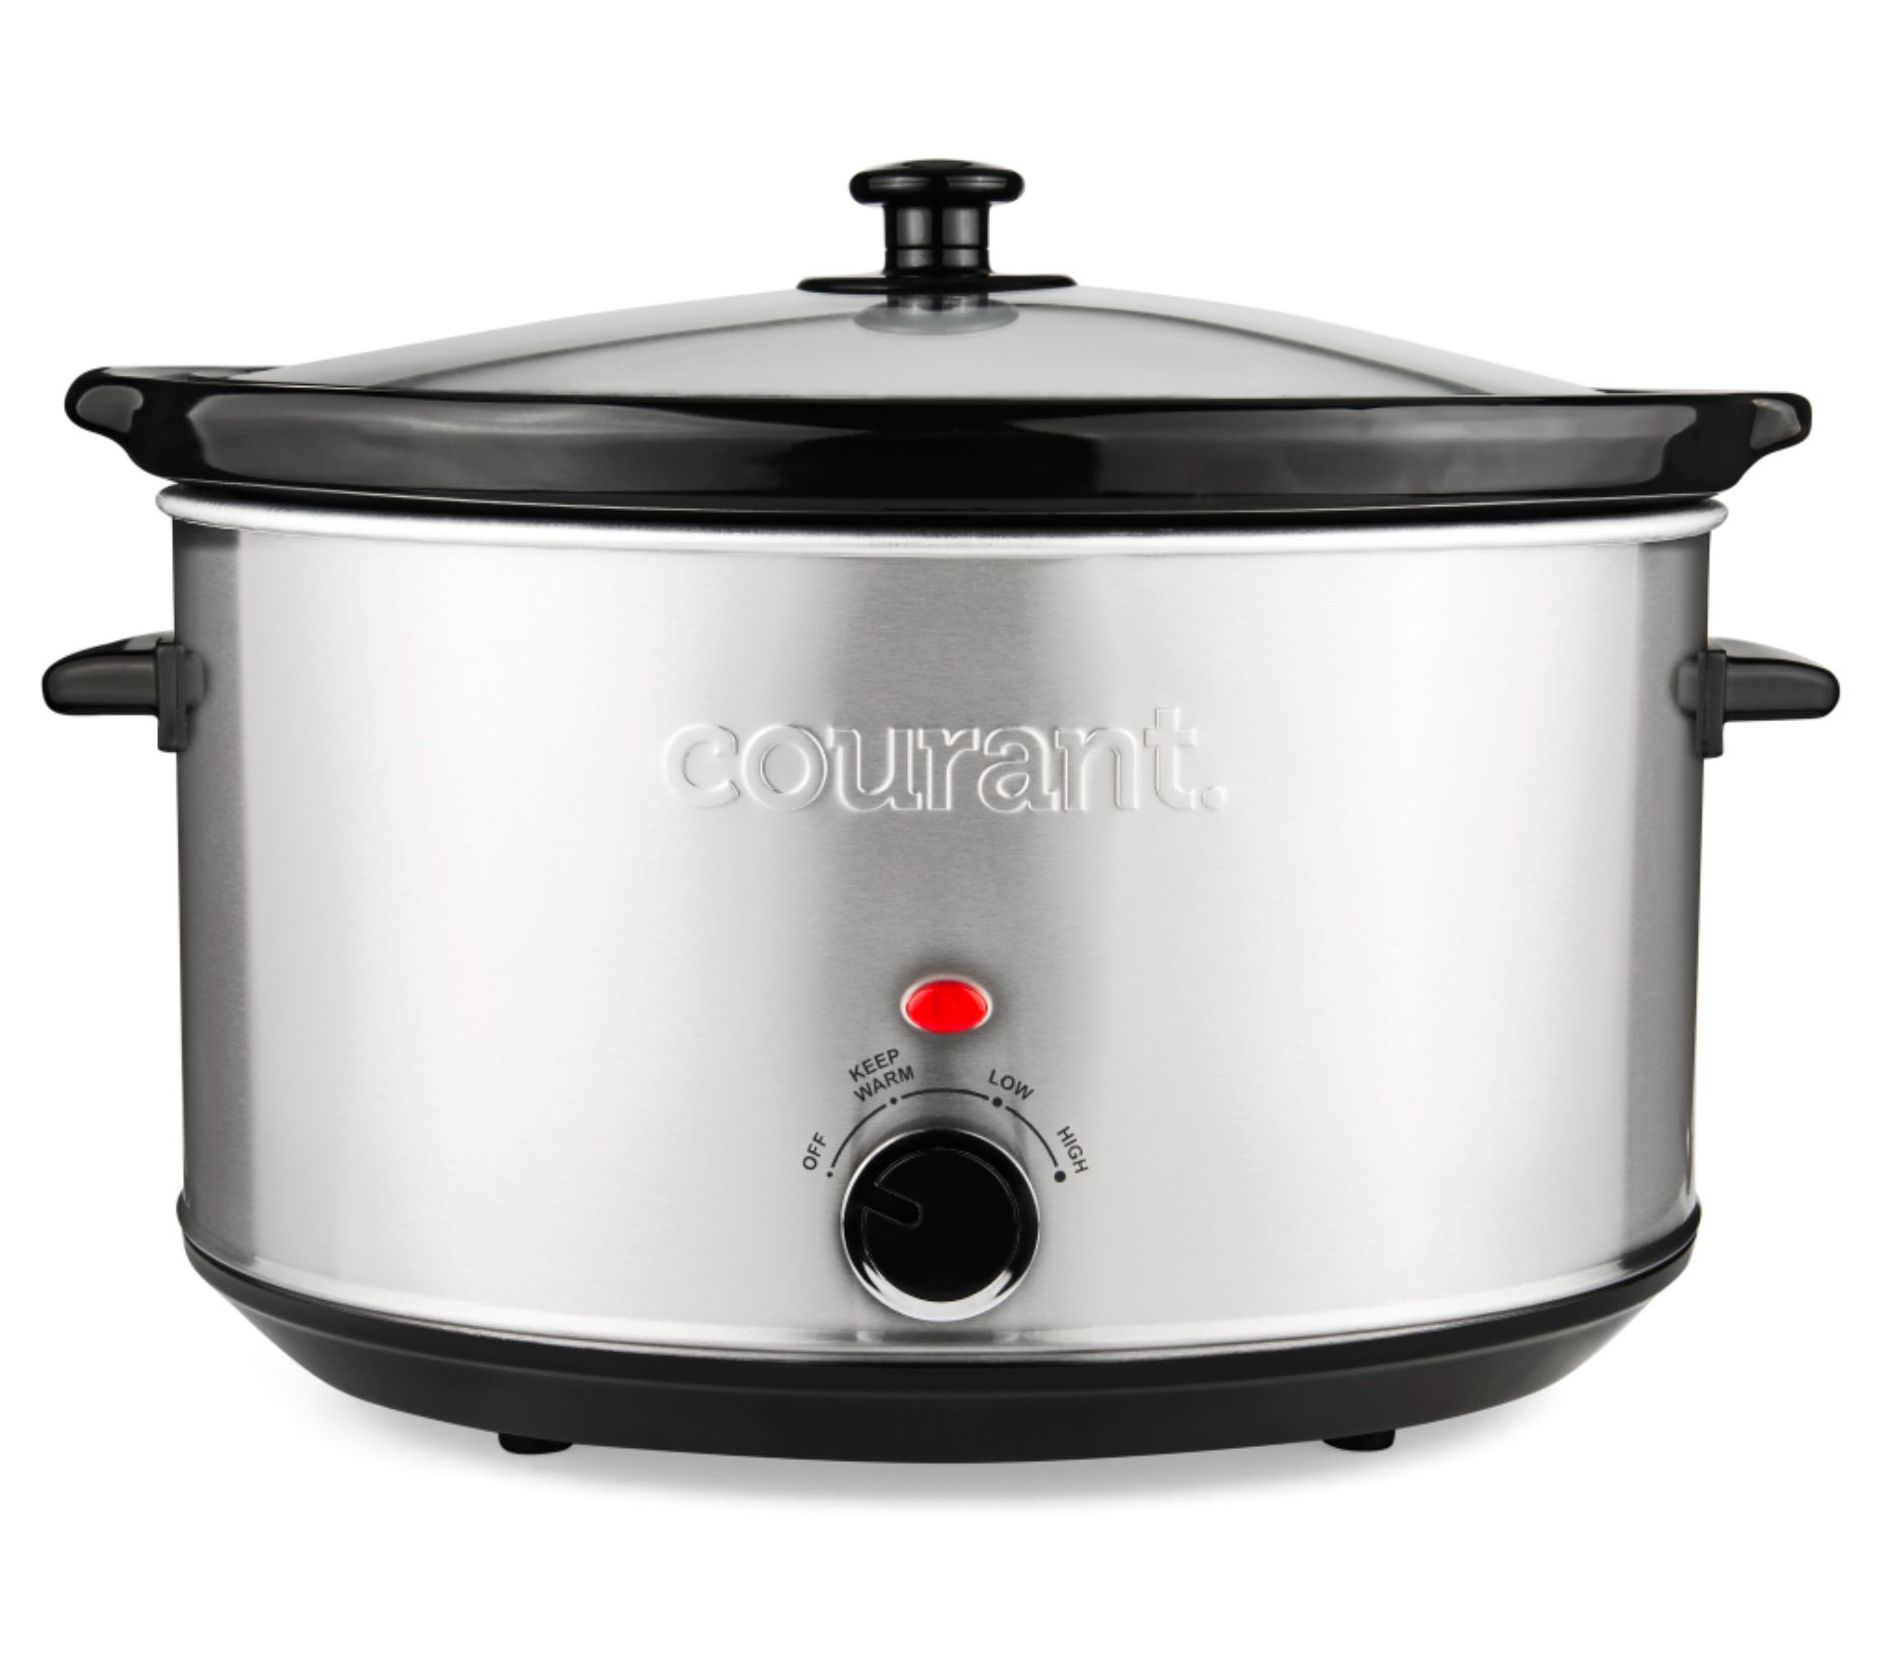 Courant 3.2 Quart Red Slow Cooker with Removabl e Ceramic Pot 